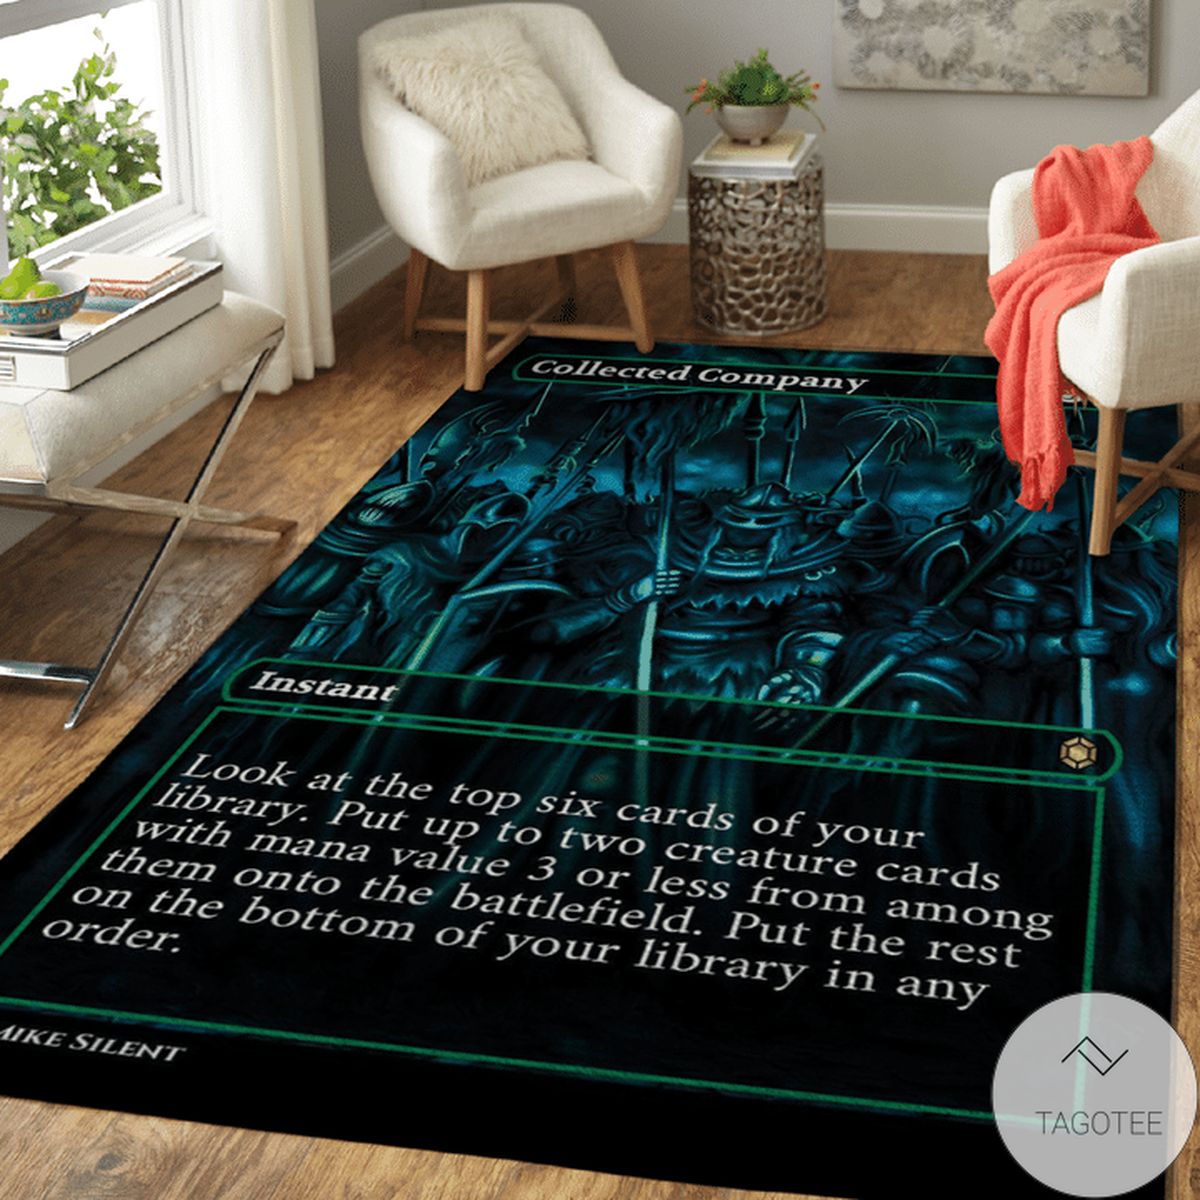 Collected Company Instant Area Rug